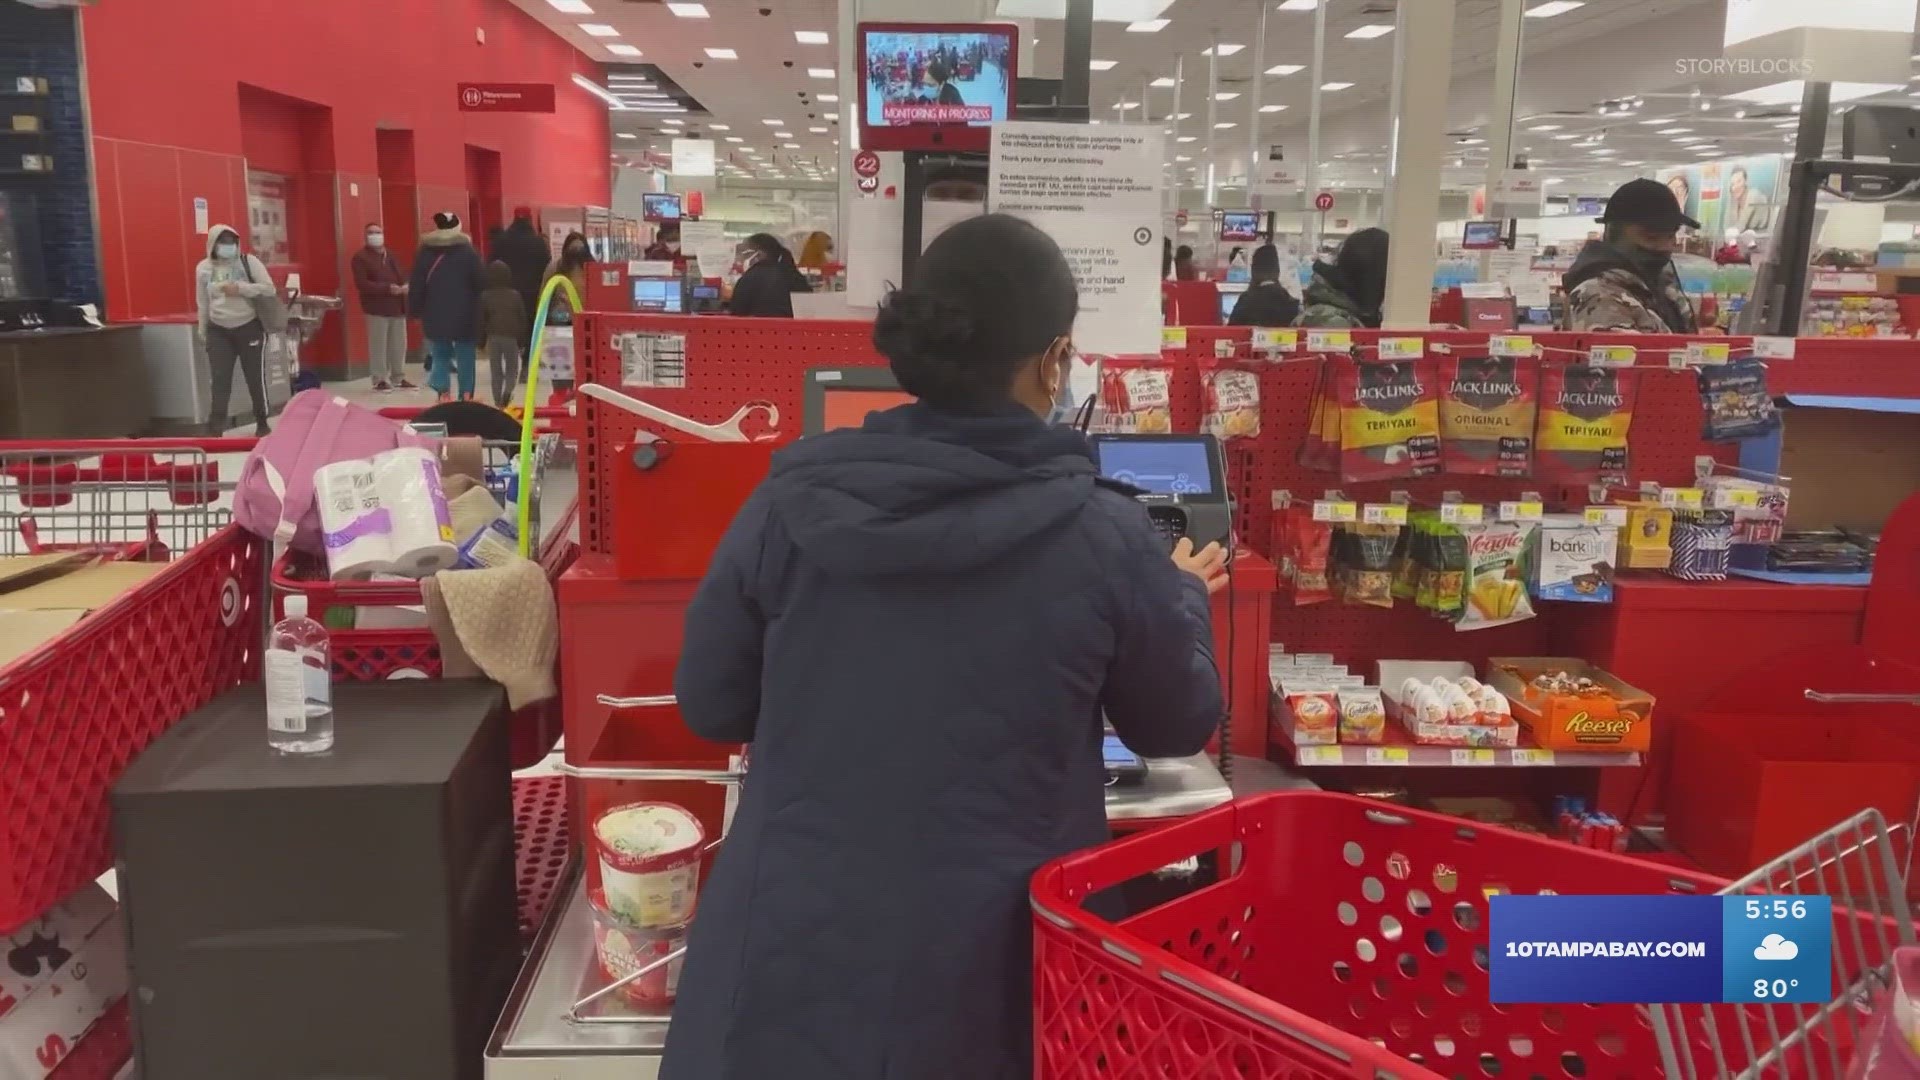 Posts online claim the stores are limiting self-checkout lanes to customers who pay for subscription services. Here’s what Walmart and Target told VERIFY.